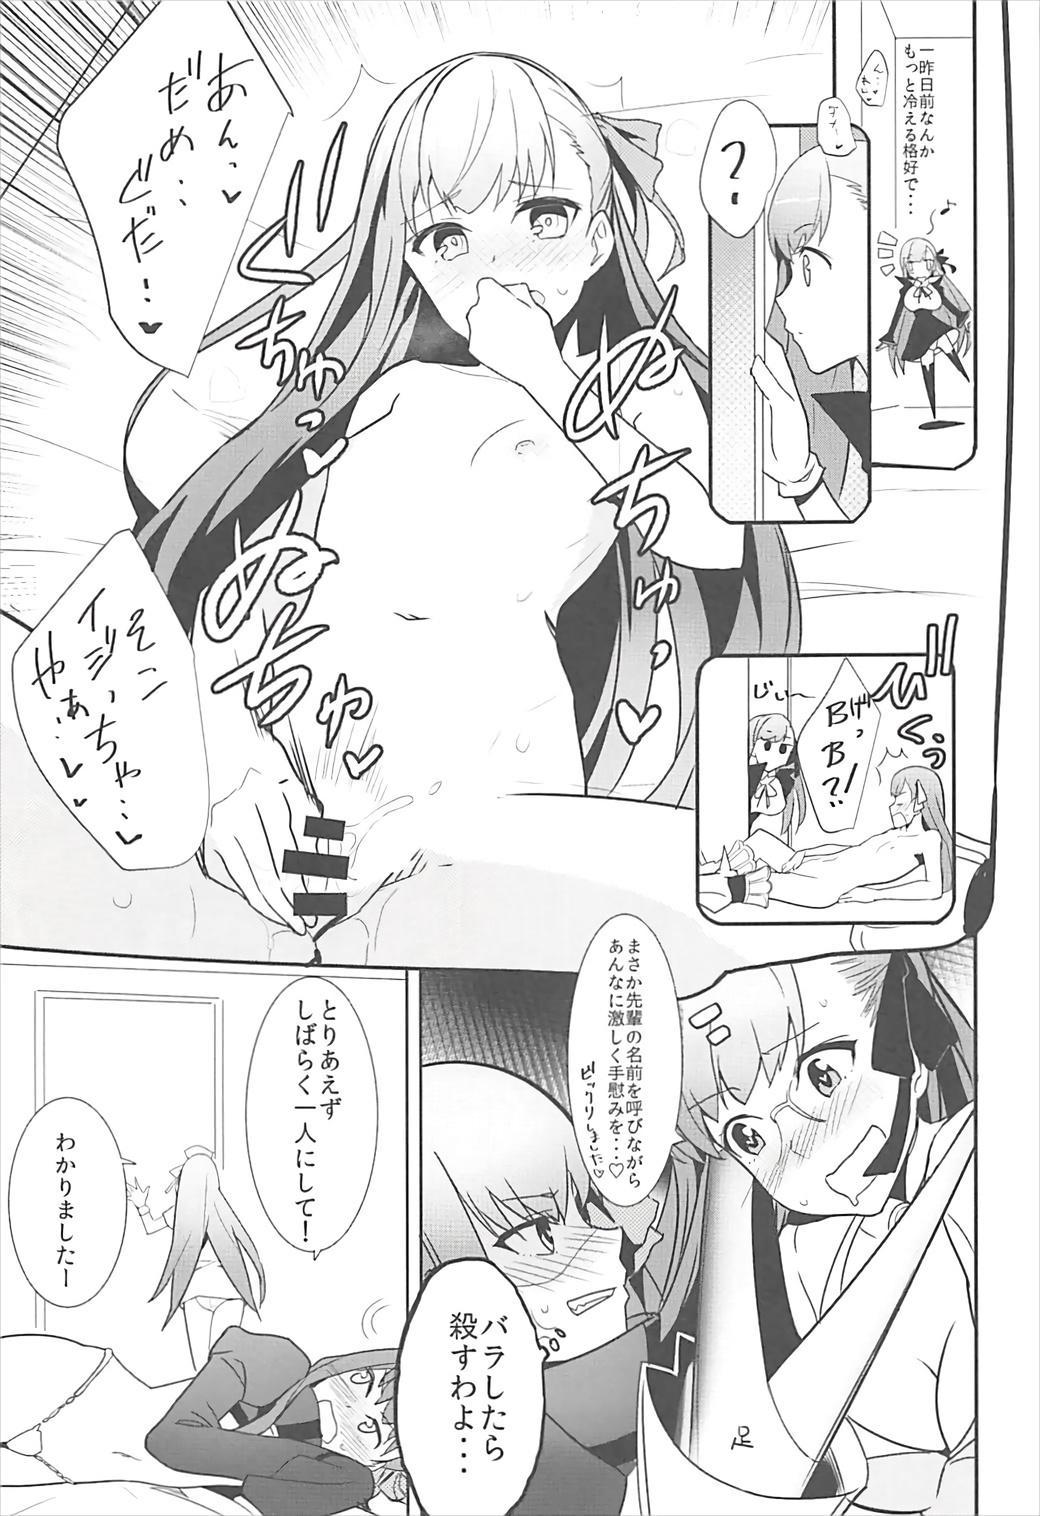 Adorable In the Passion Melty heart.2 - Fate grand order Free Fuck - Page 6